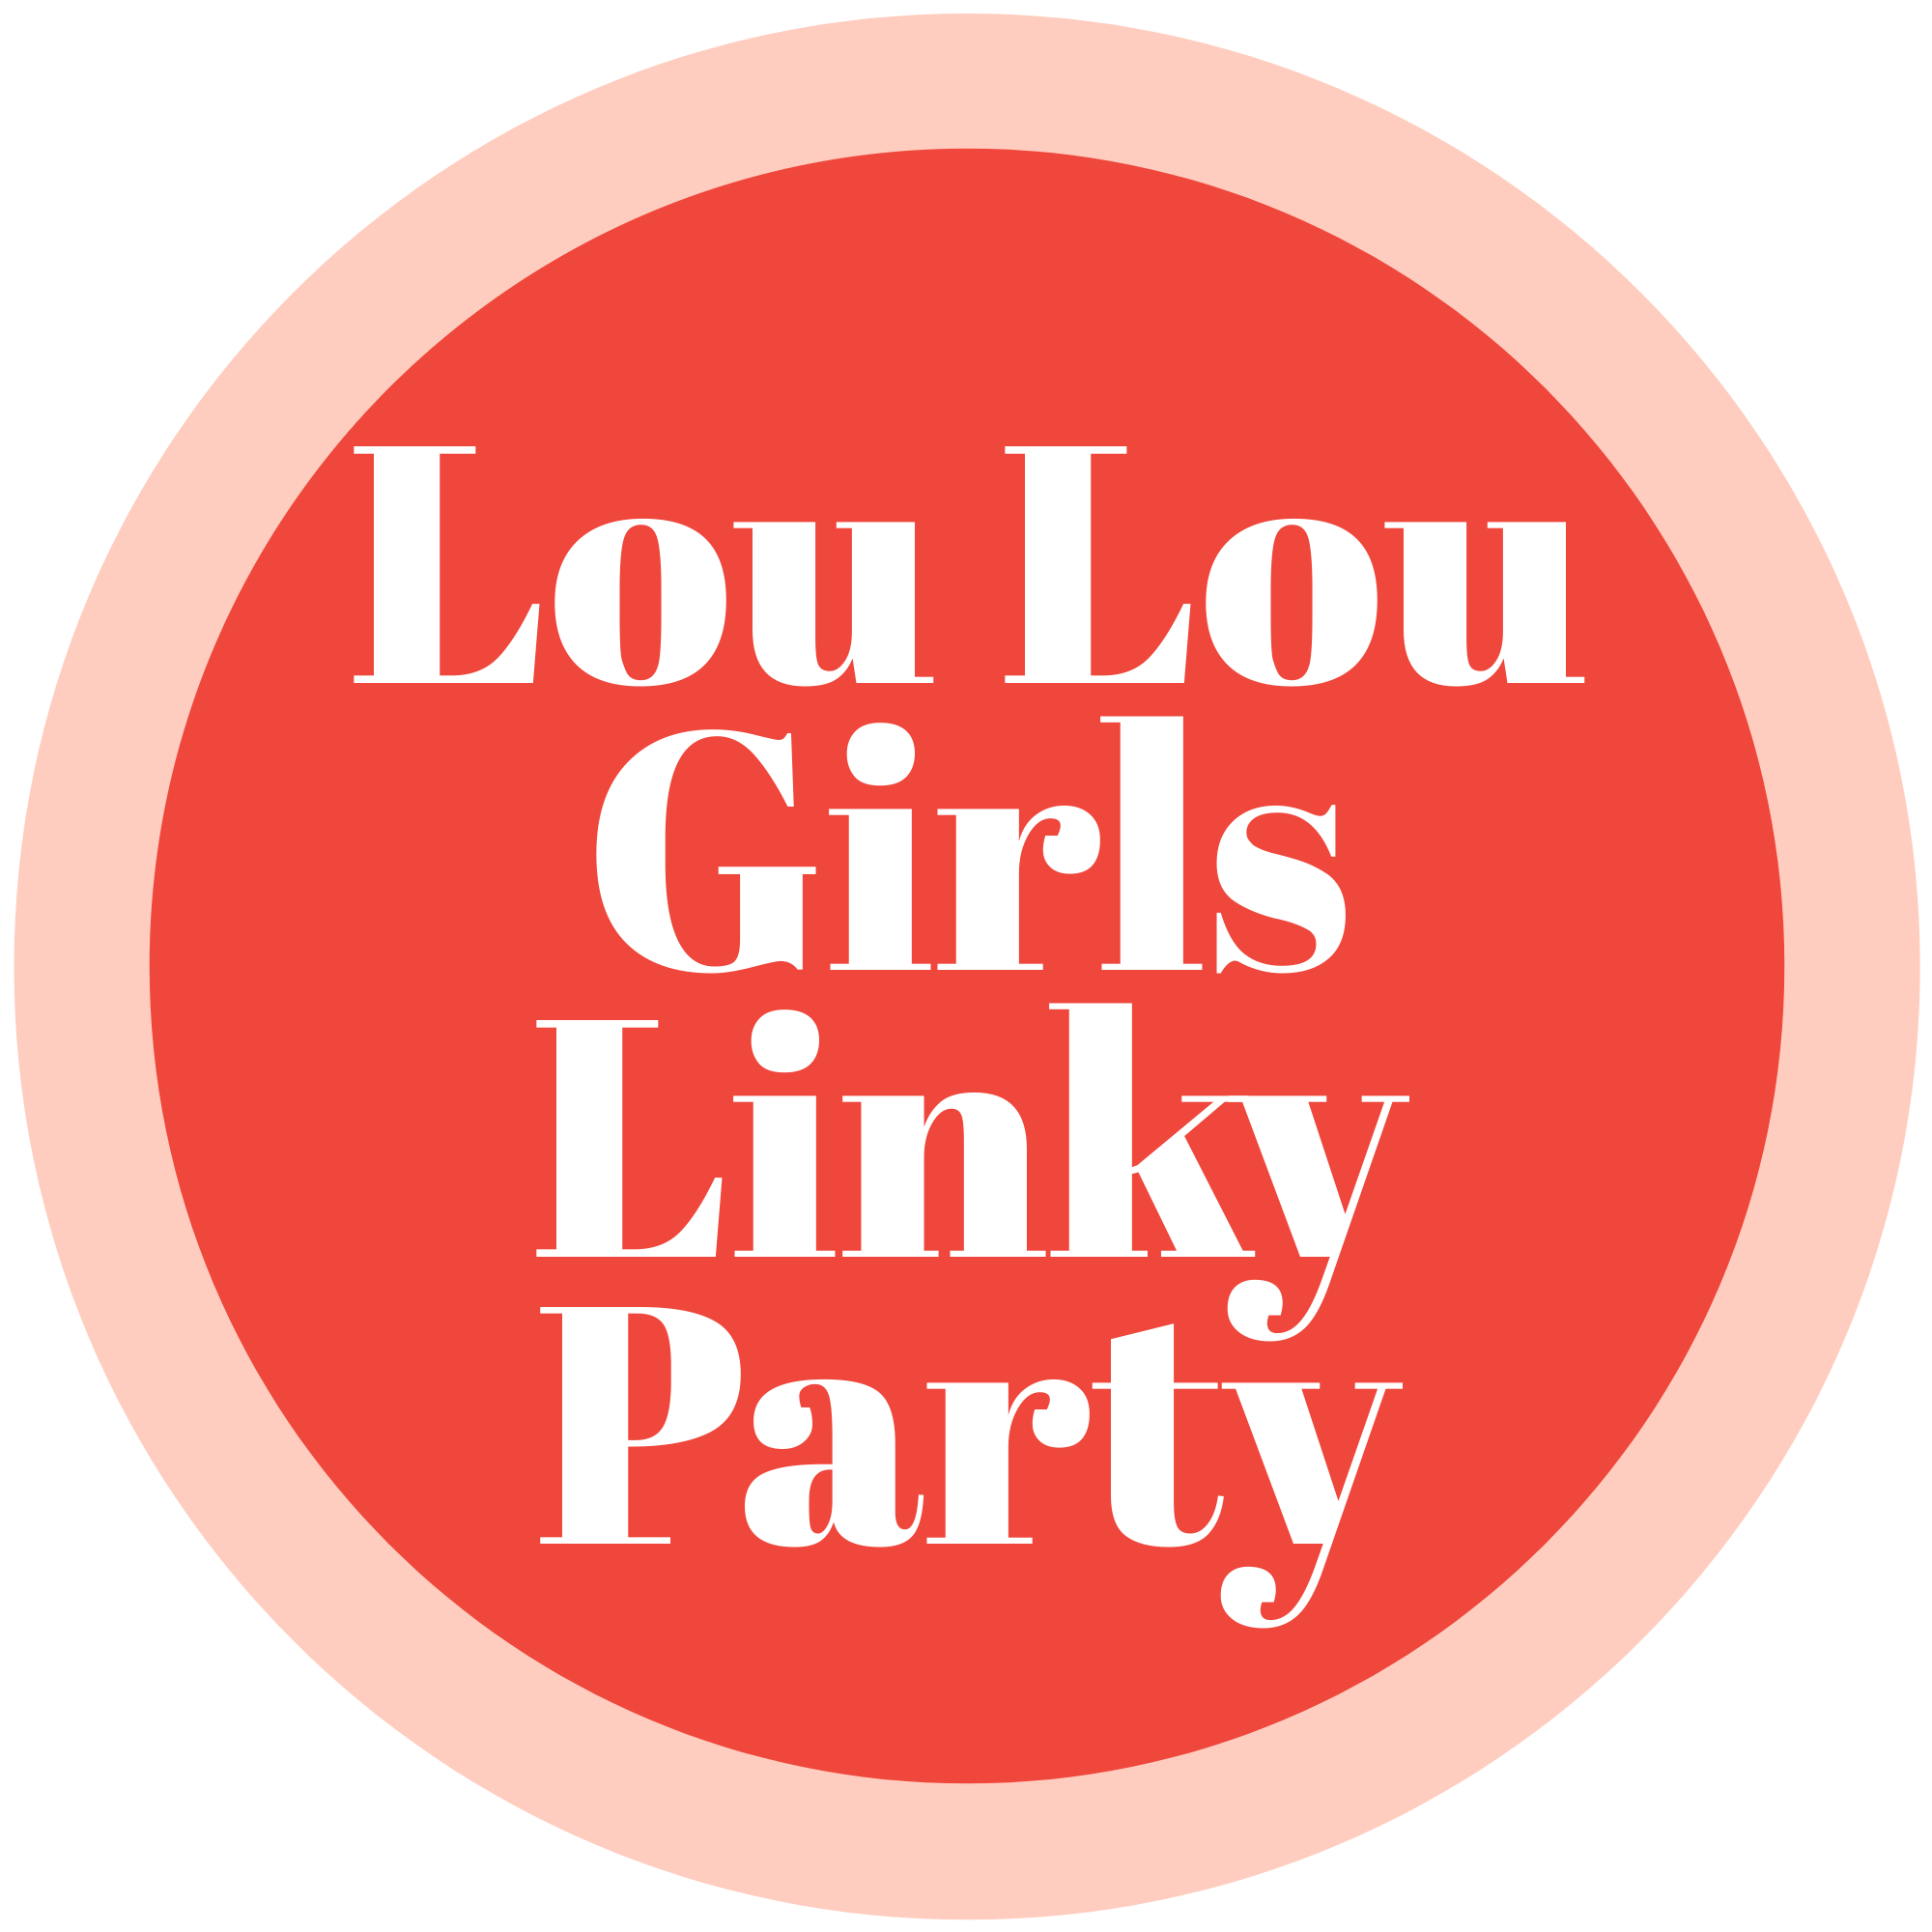 Lou Lou Girls Fabulous Party 481 #linkyparty #bloghop #linkyparties